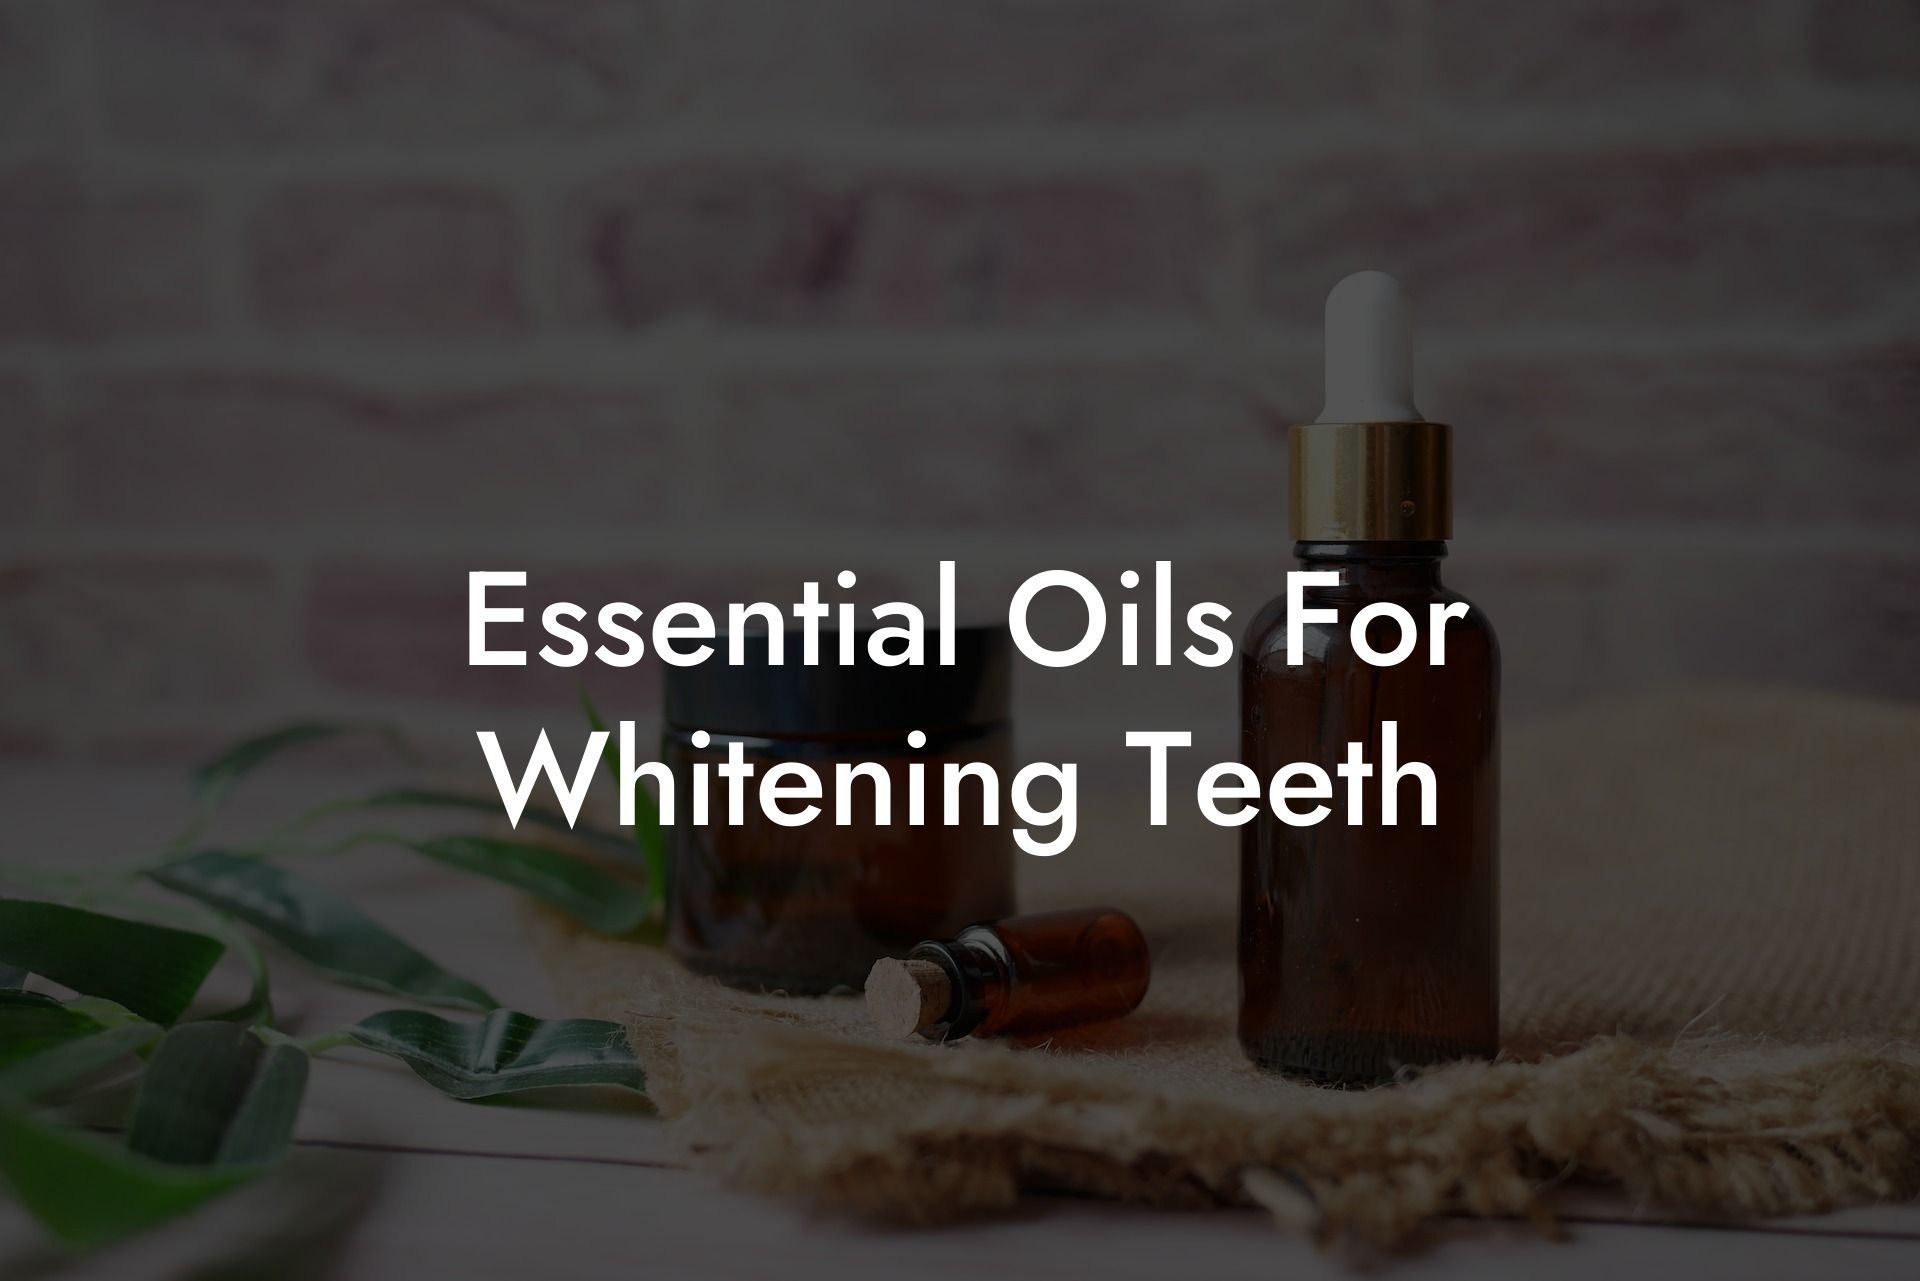 Essential Oils For Whitening Teeth